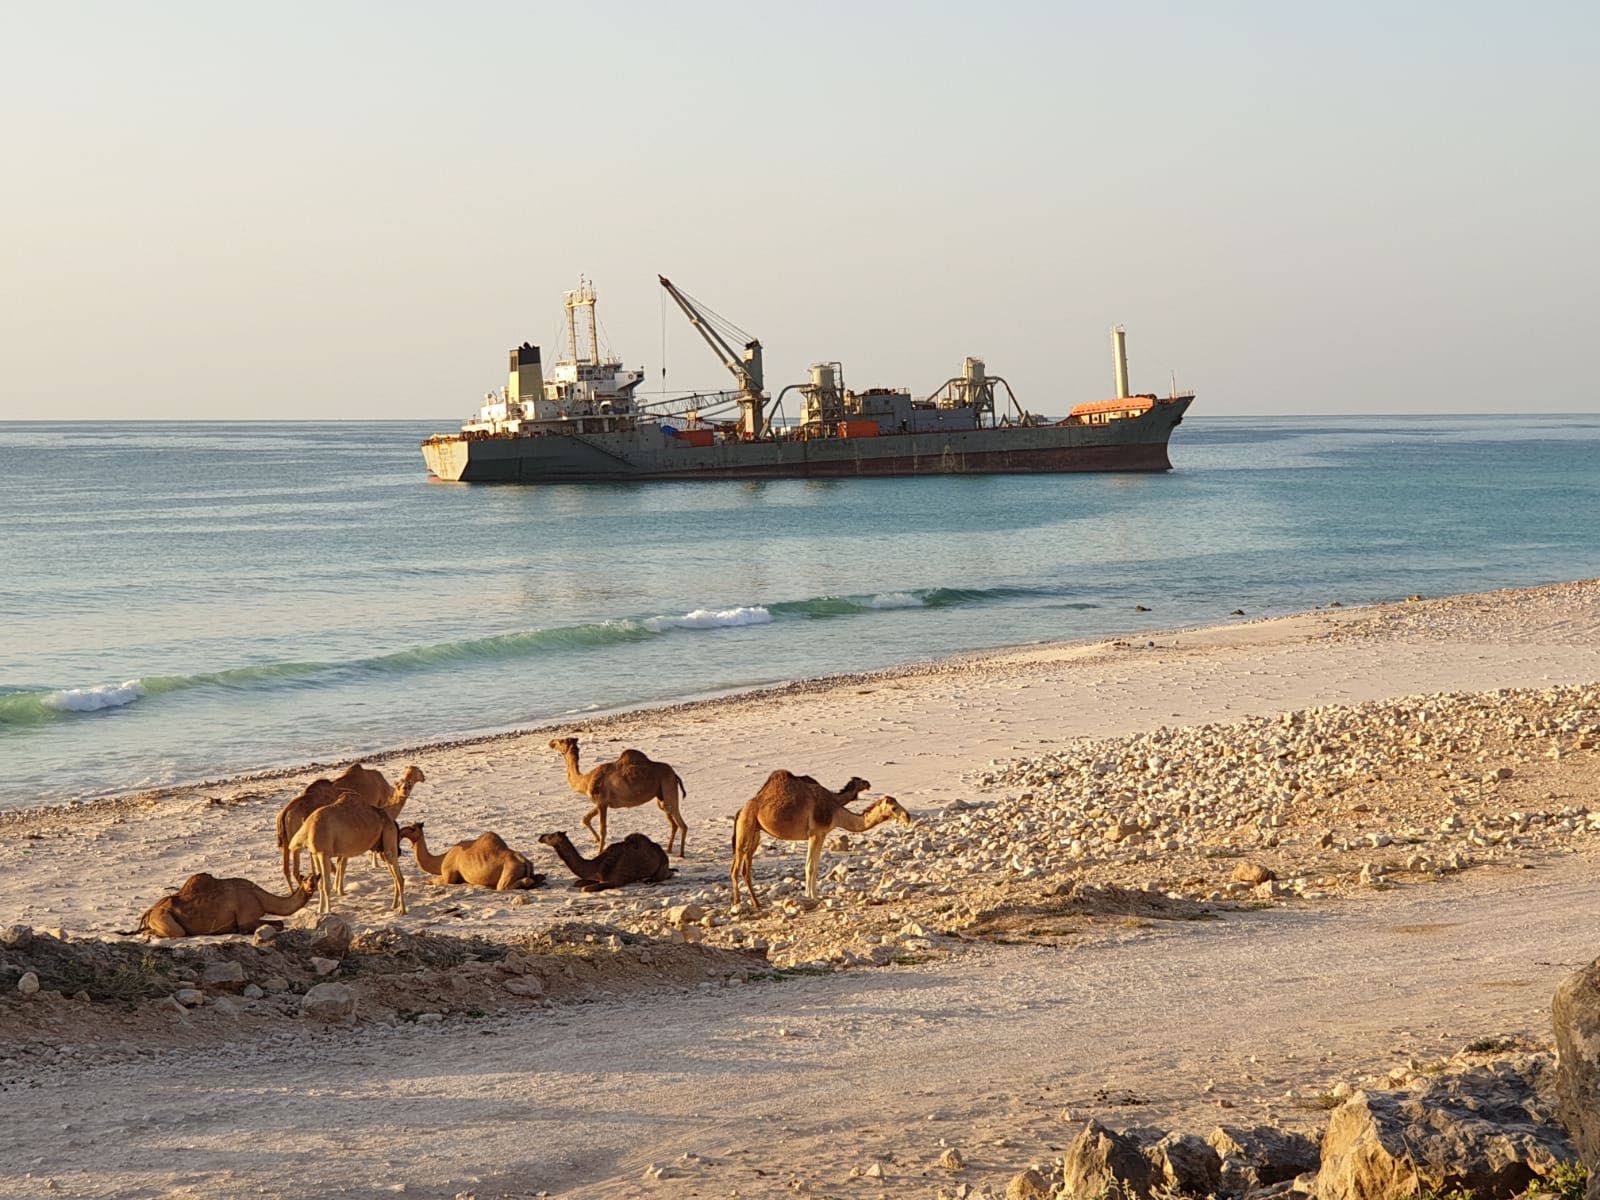 A flock of camels sit on a beach with a shipping vessel in the backgroun